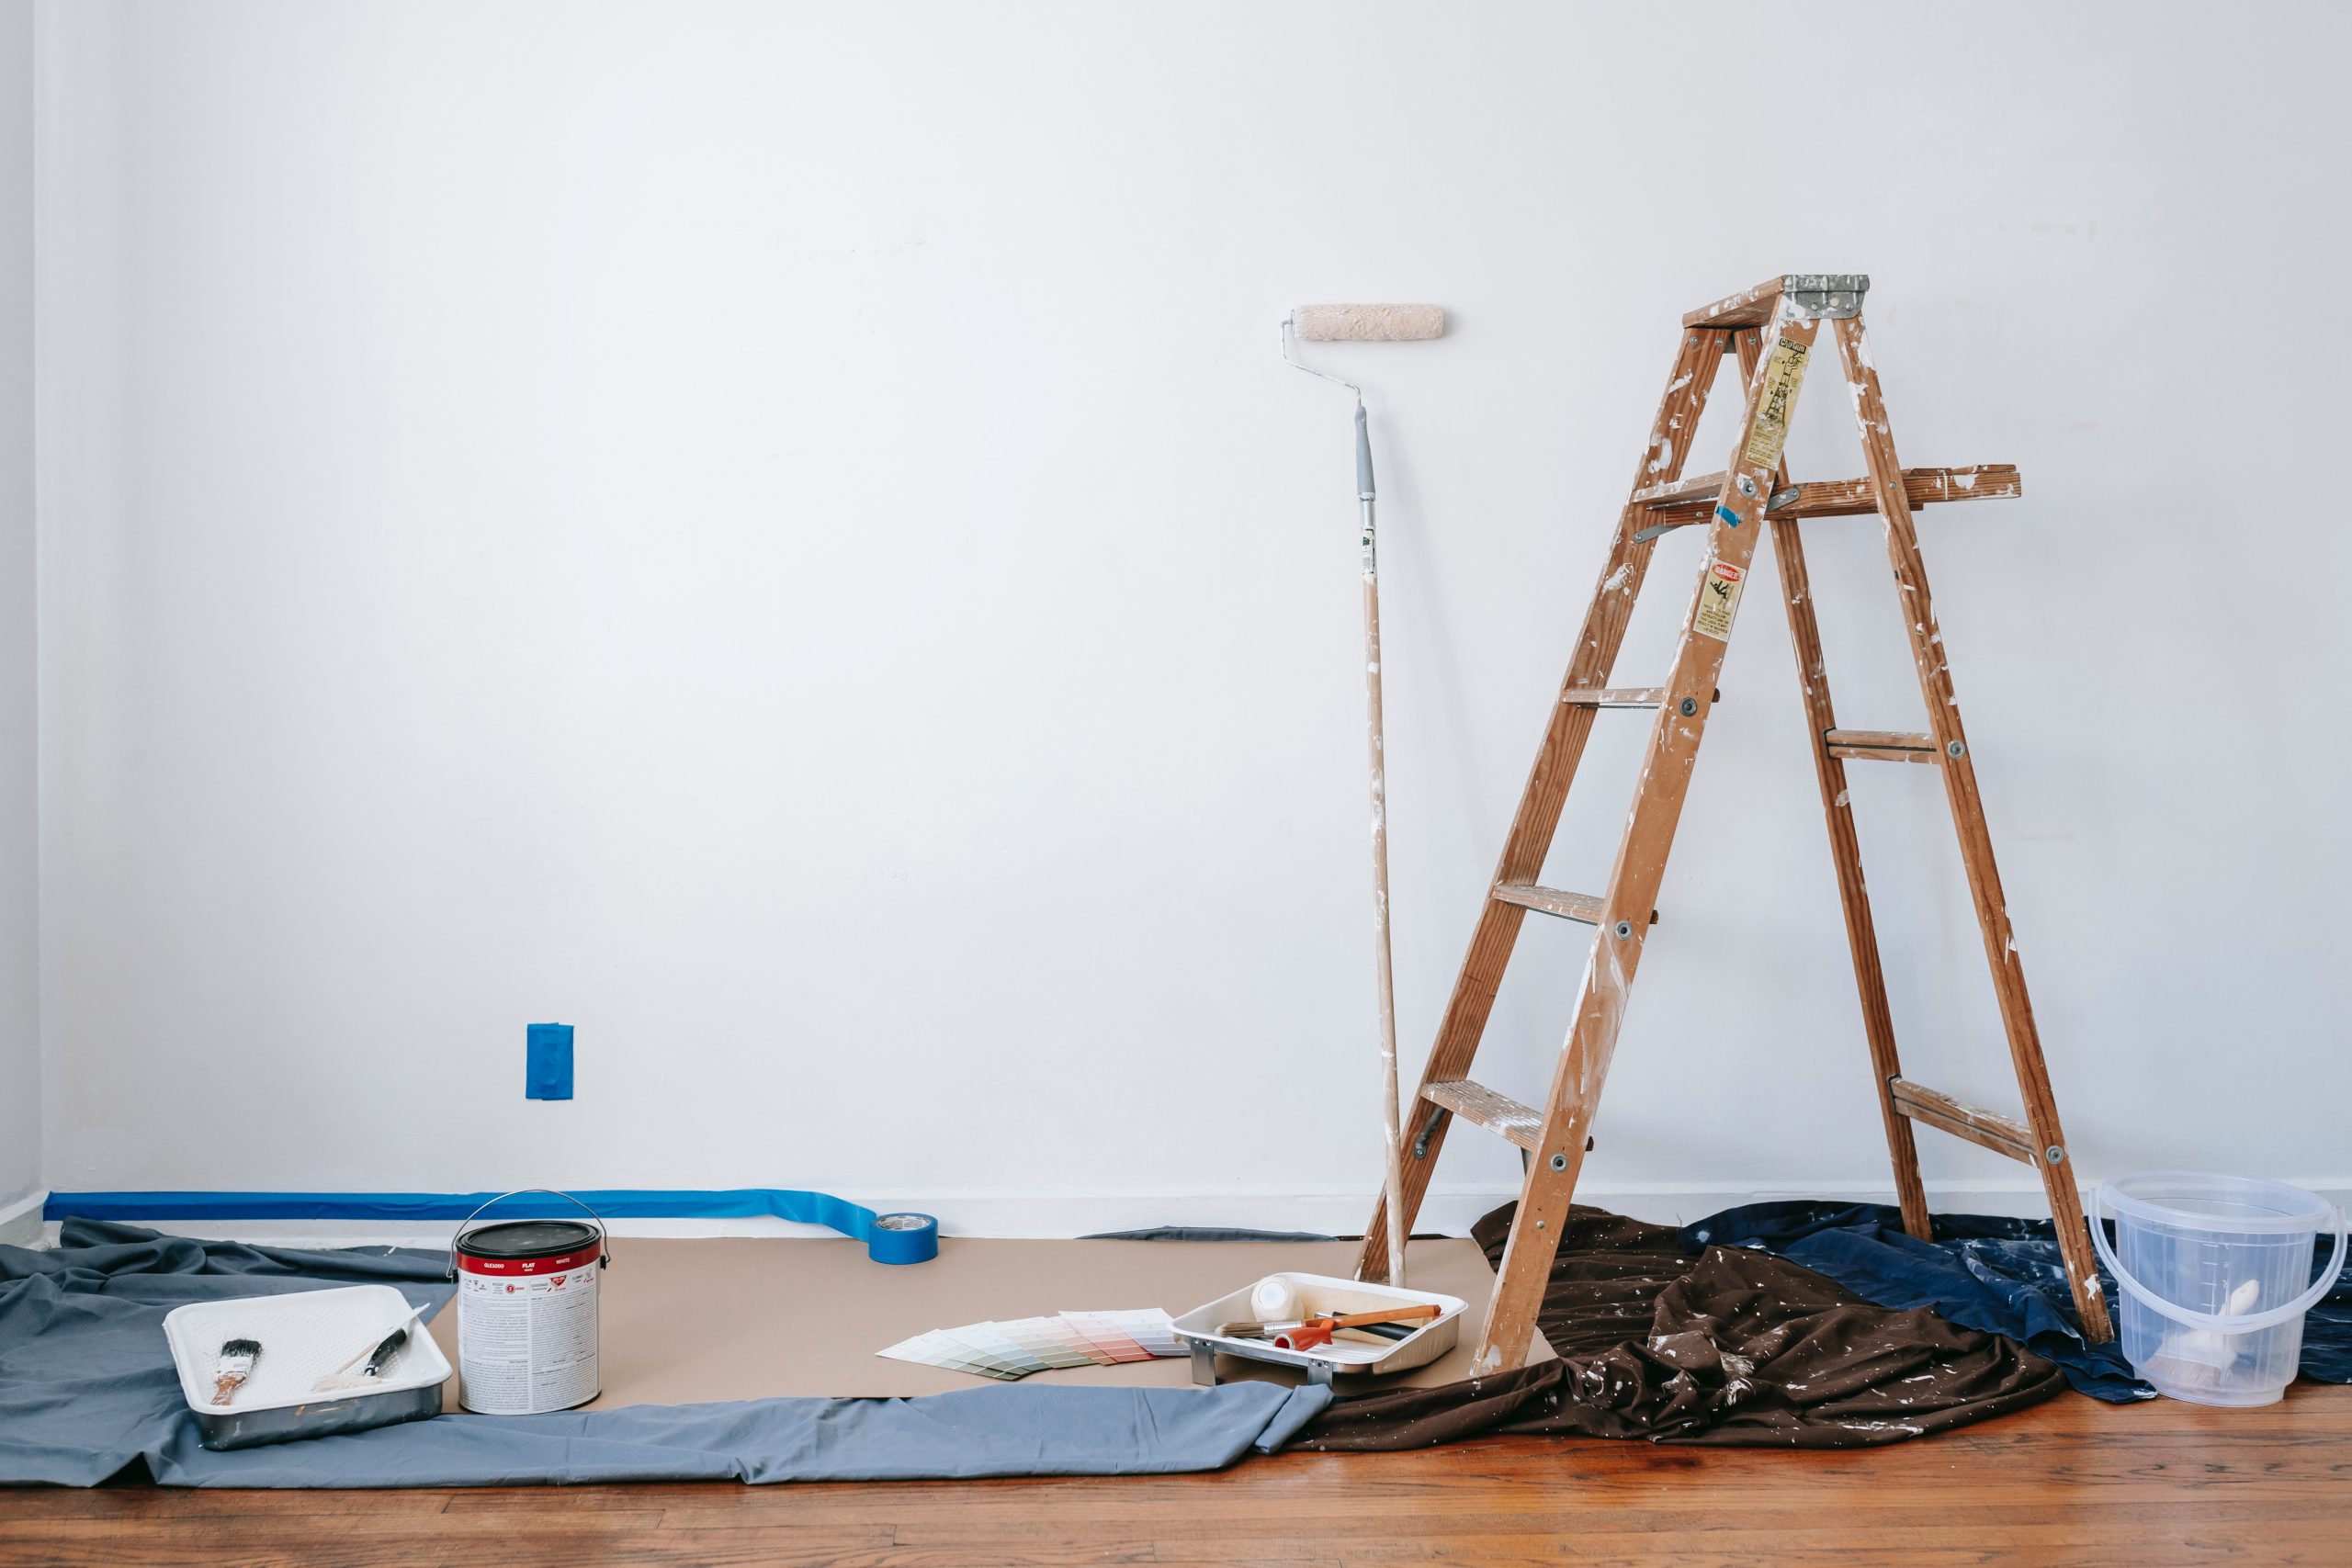 10 Quick Renovations to Add Value to Your Home